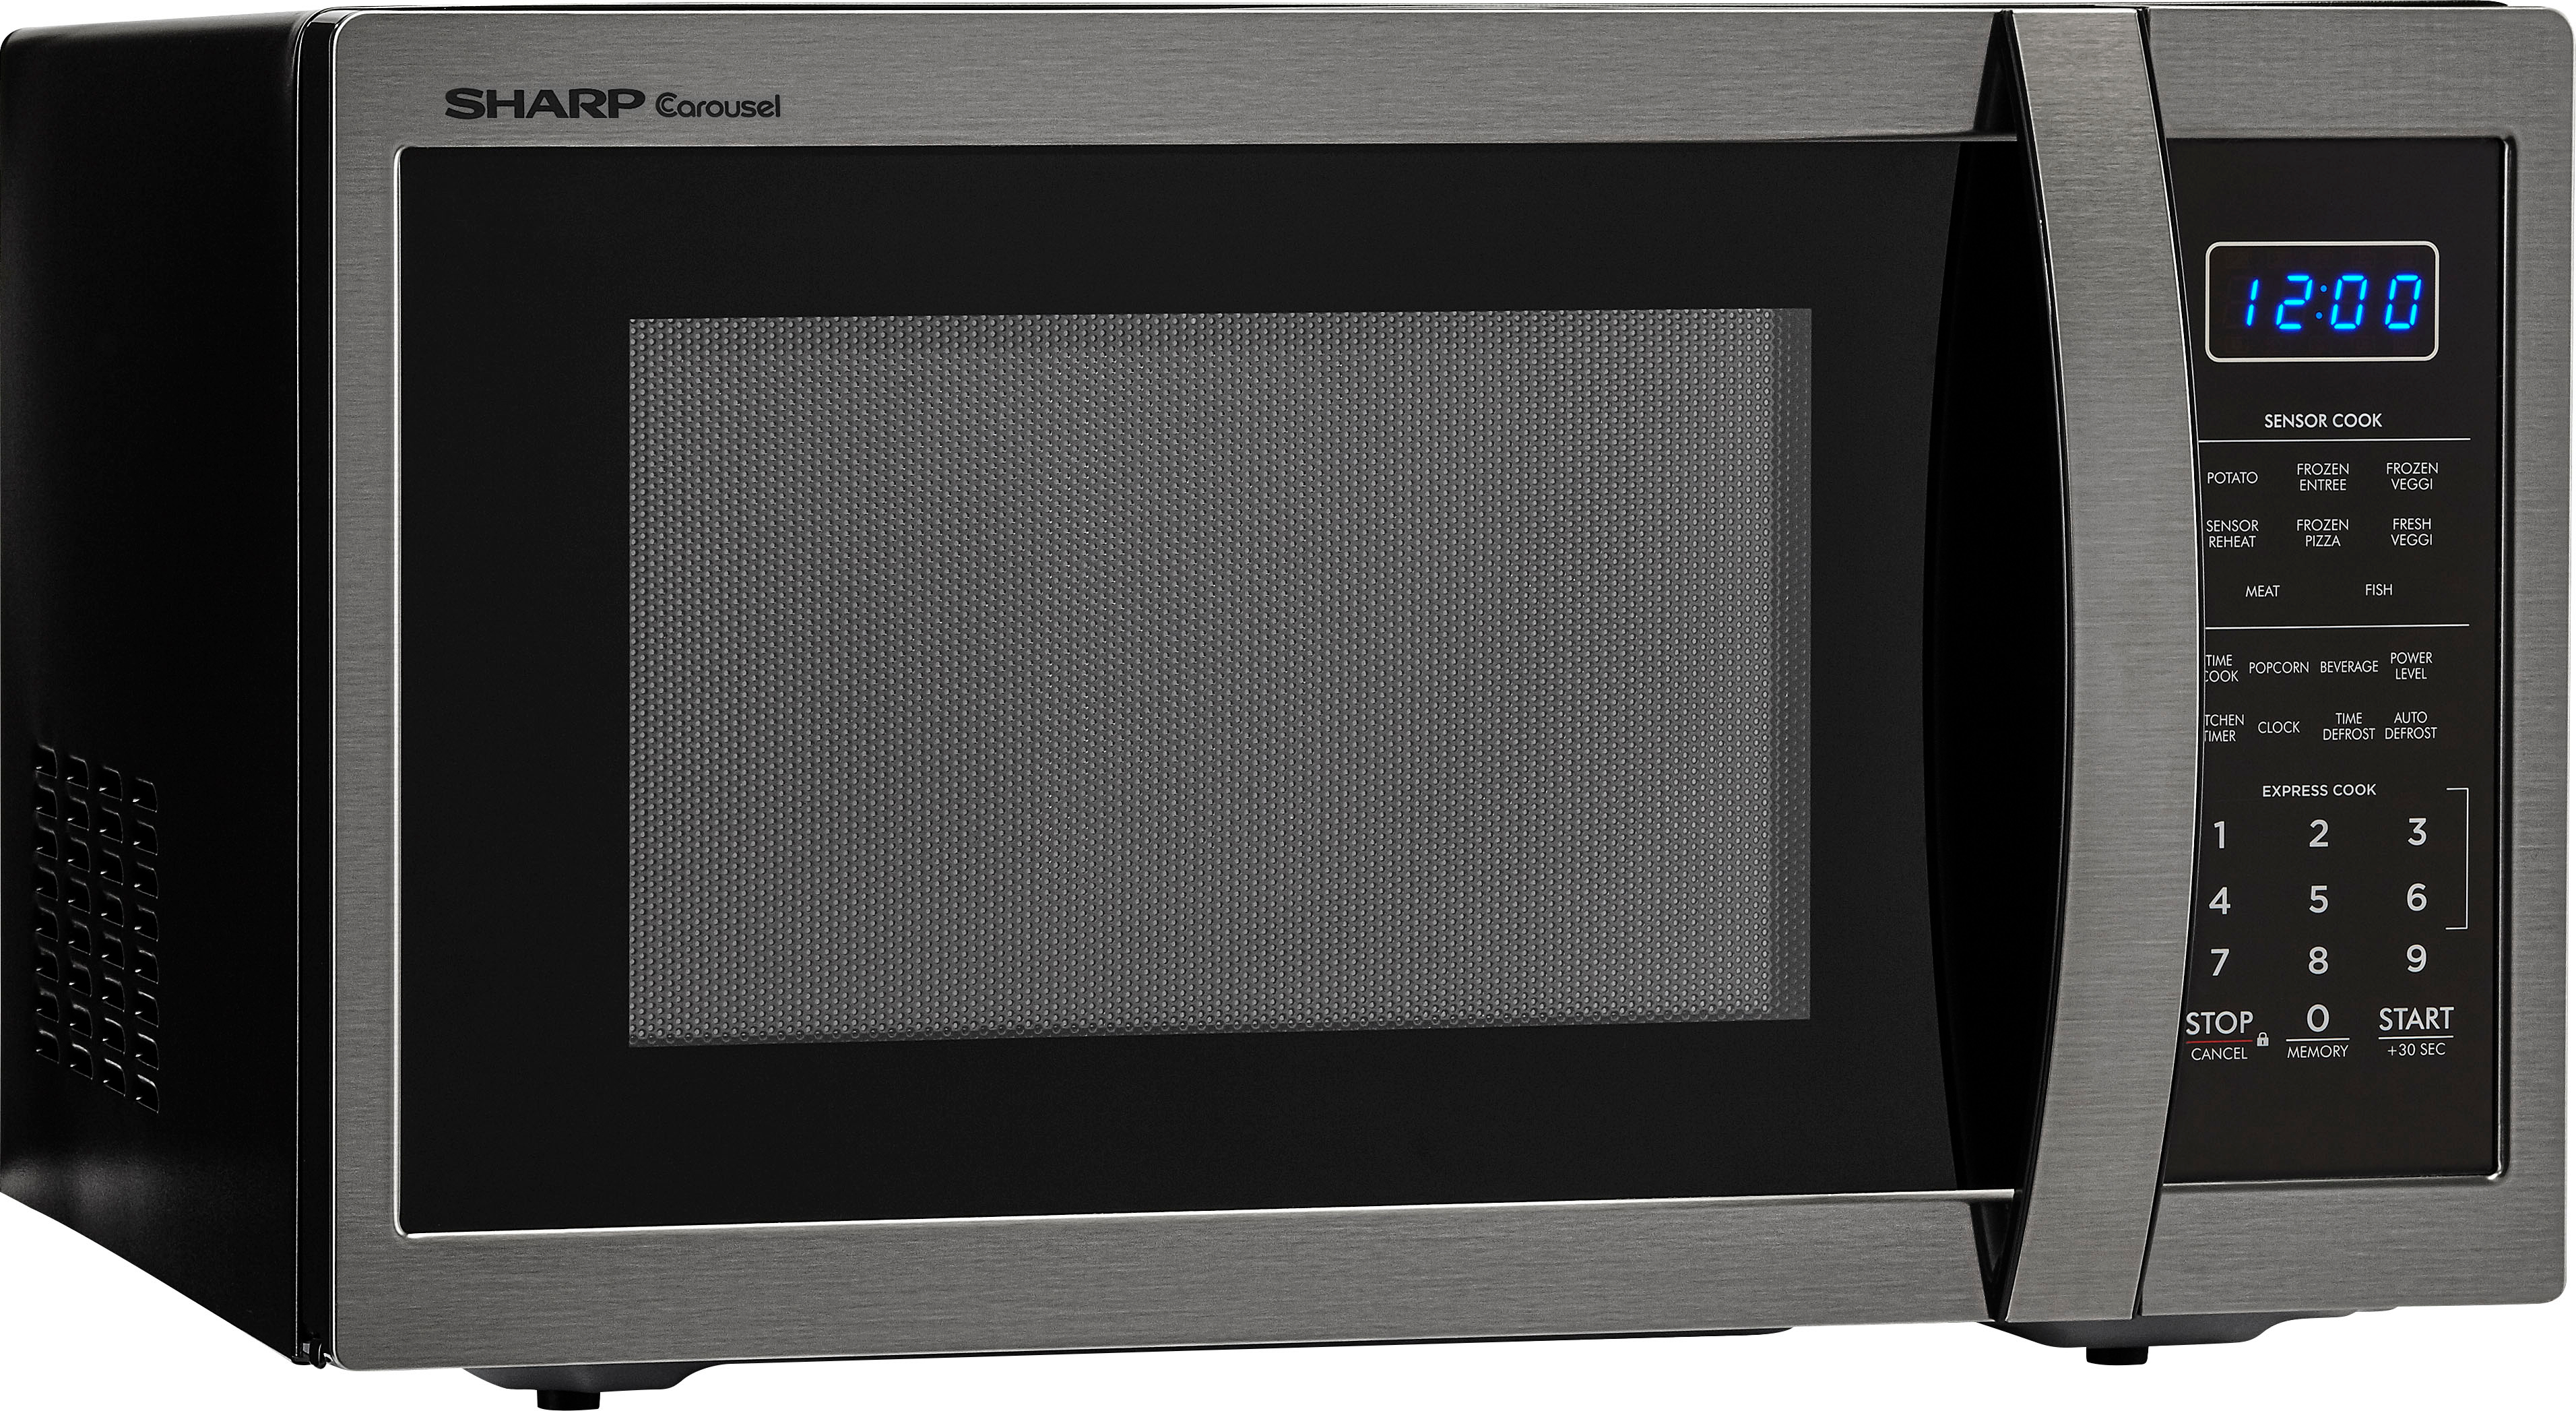 Sharp - Carousel 1.4 Cu. Ft. Mid-Size Microwave - Black Stainless Steel